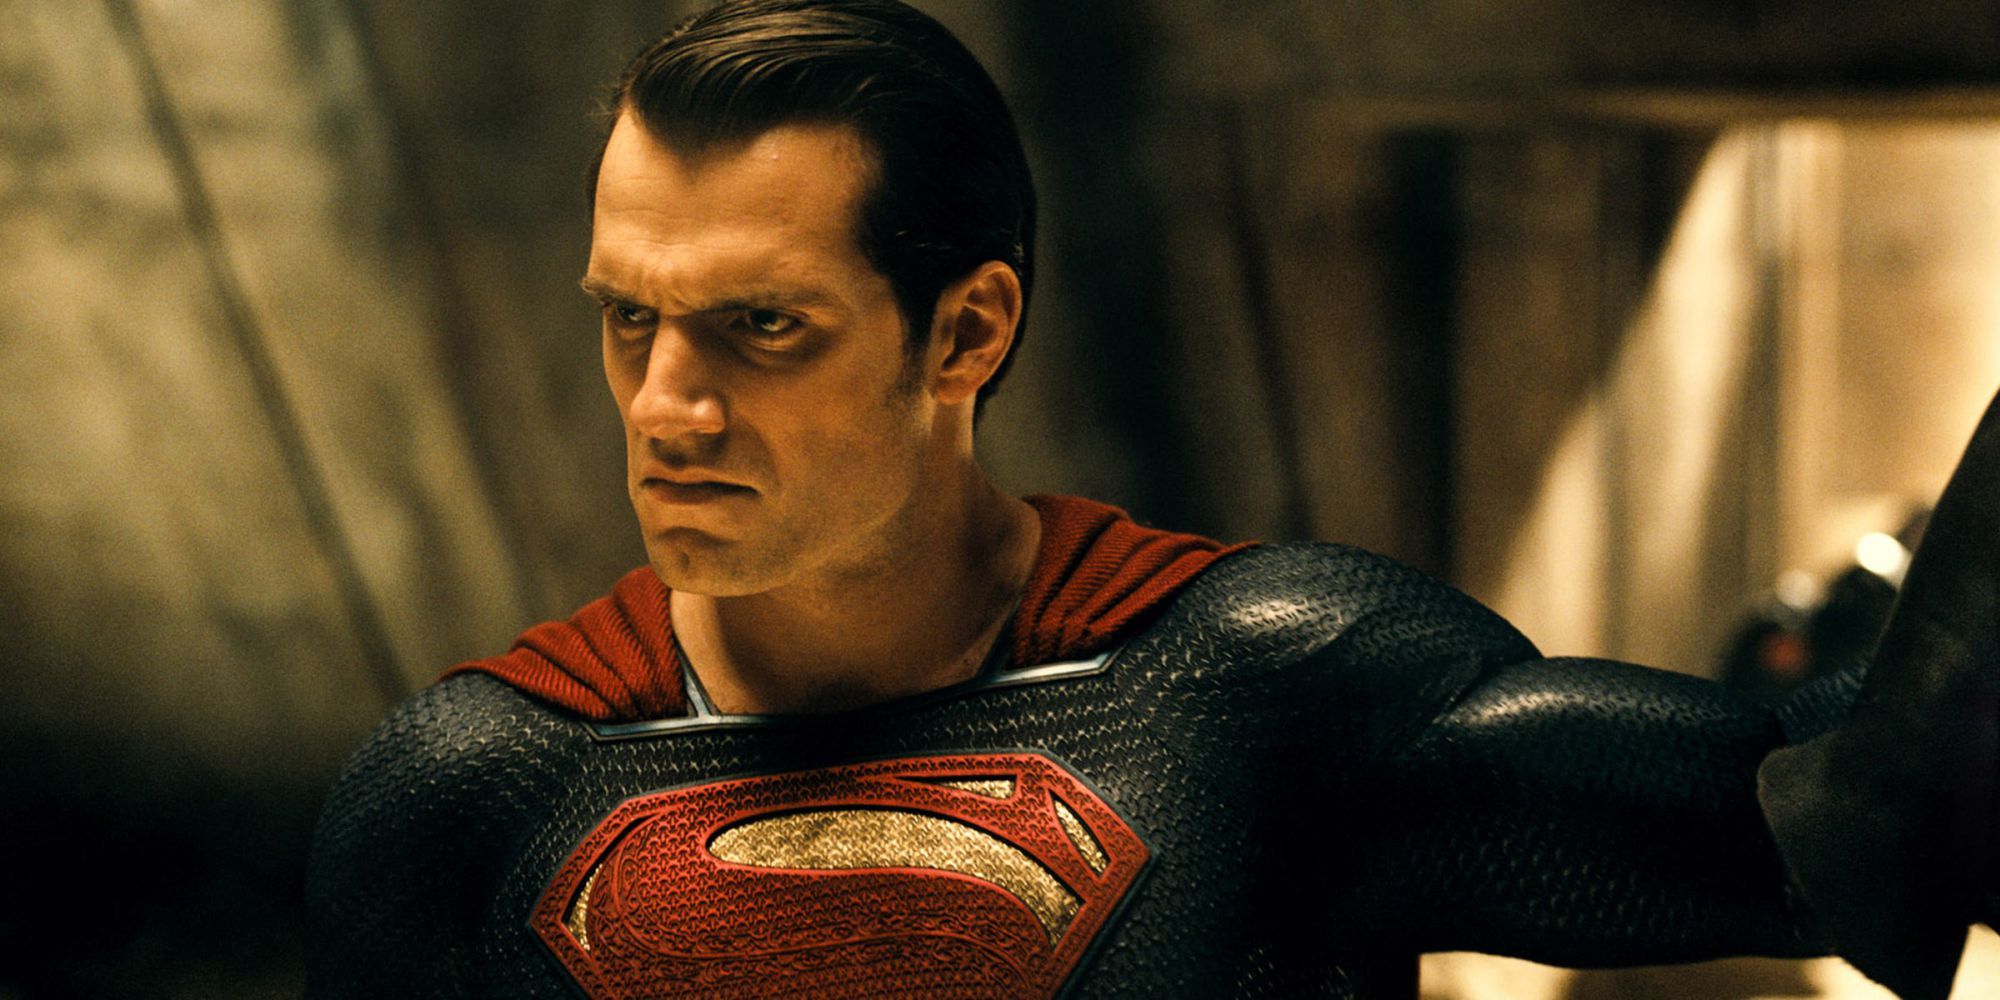 In a recent interview Dwayne Johnson blames previous DC leadership for not getting Henry Cavill back sooner.